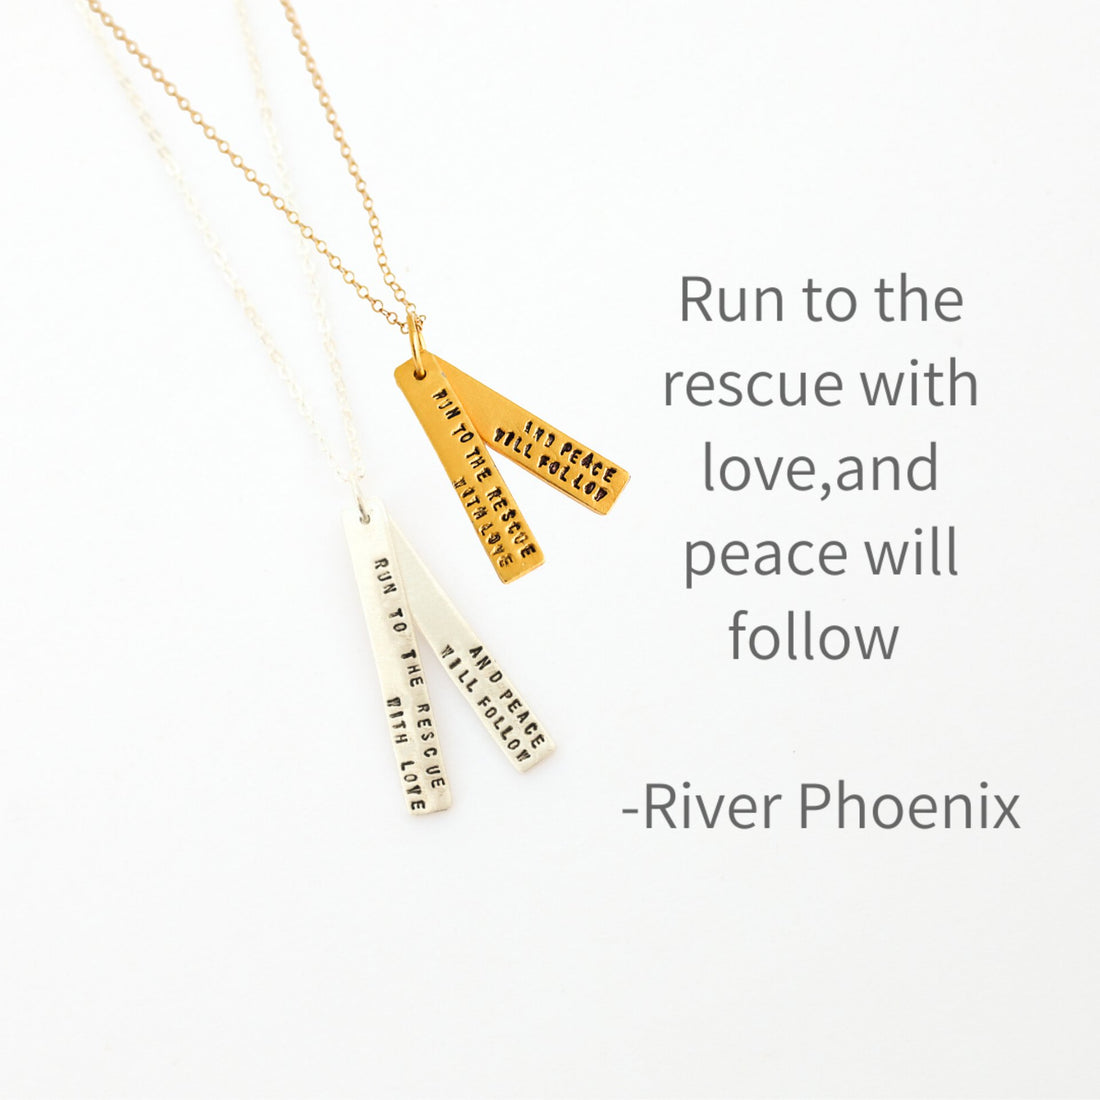 "Run to the rescue with love, and peace will follow" -River Phoenix Quote Necklace - Chocolate and Steel